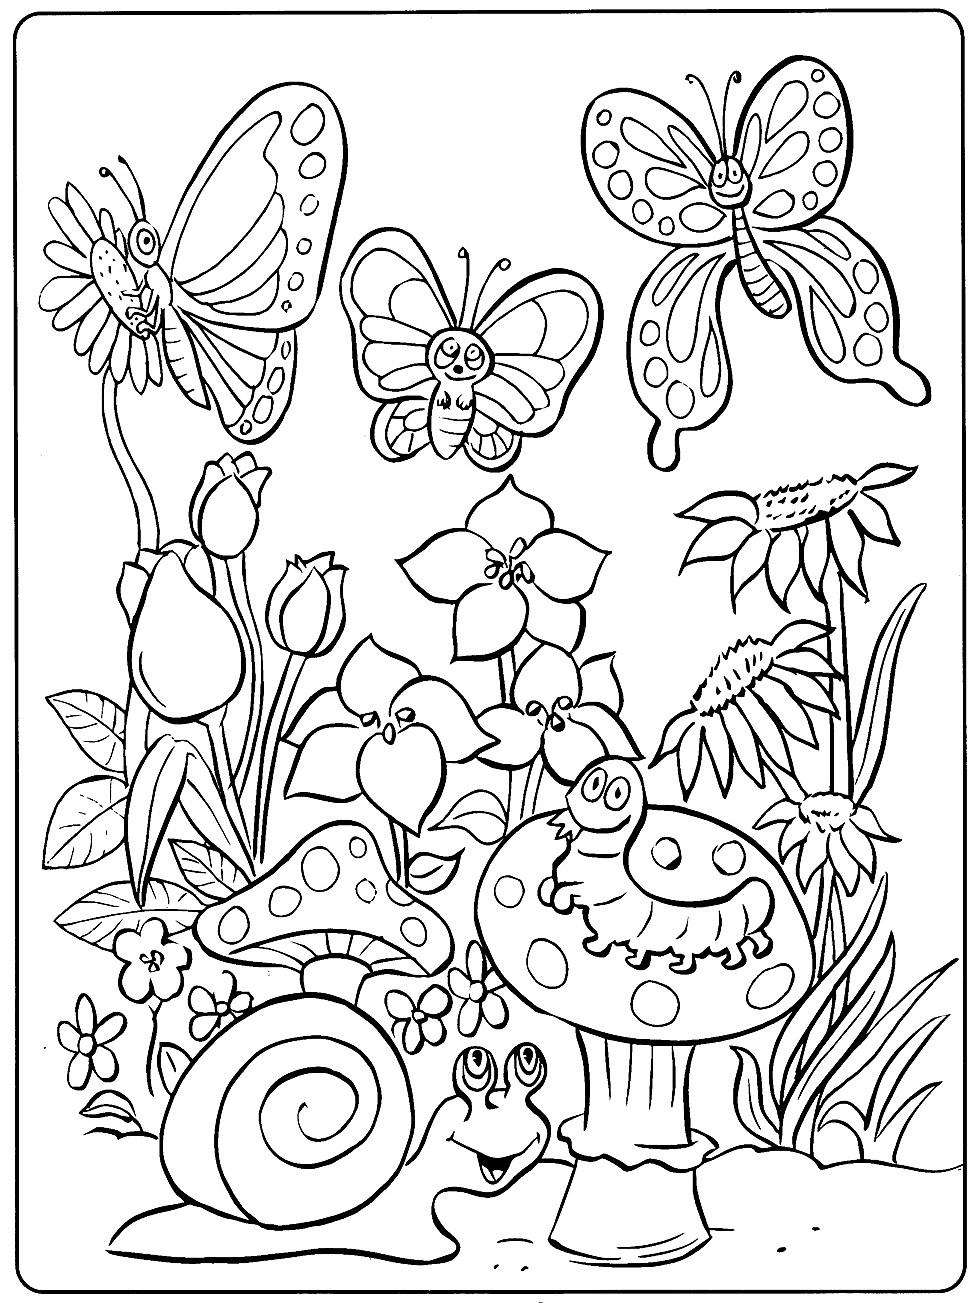 Toddler Animal Coloring Pages
 Toddler Coloring Pages